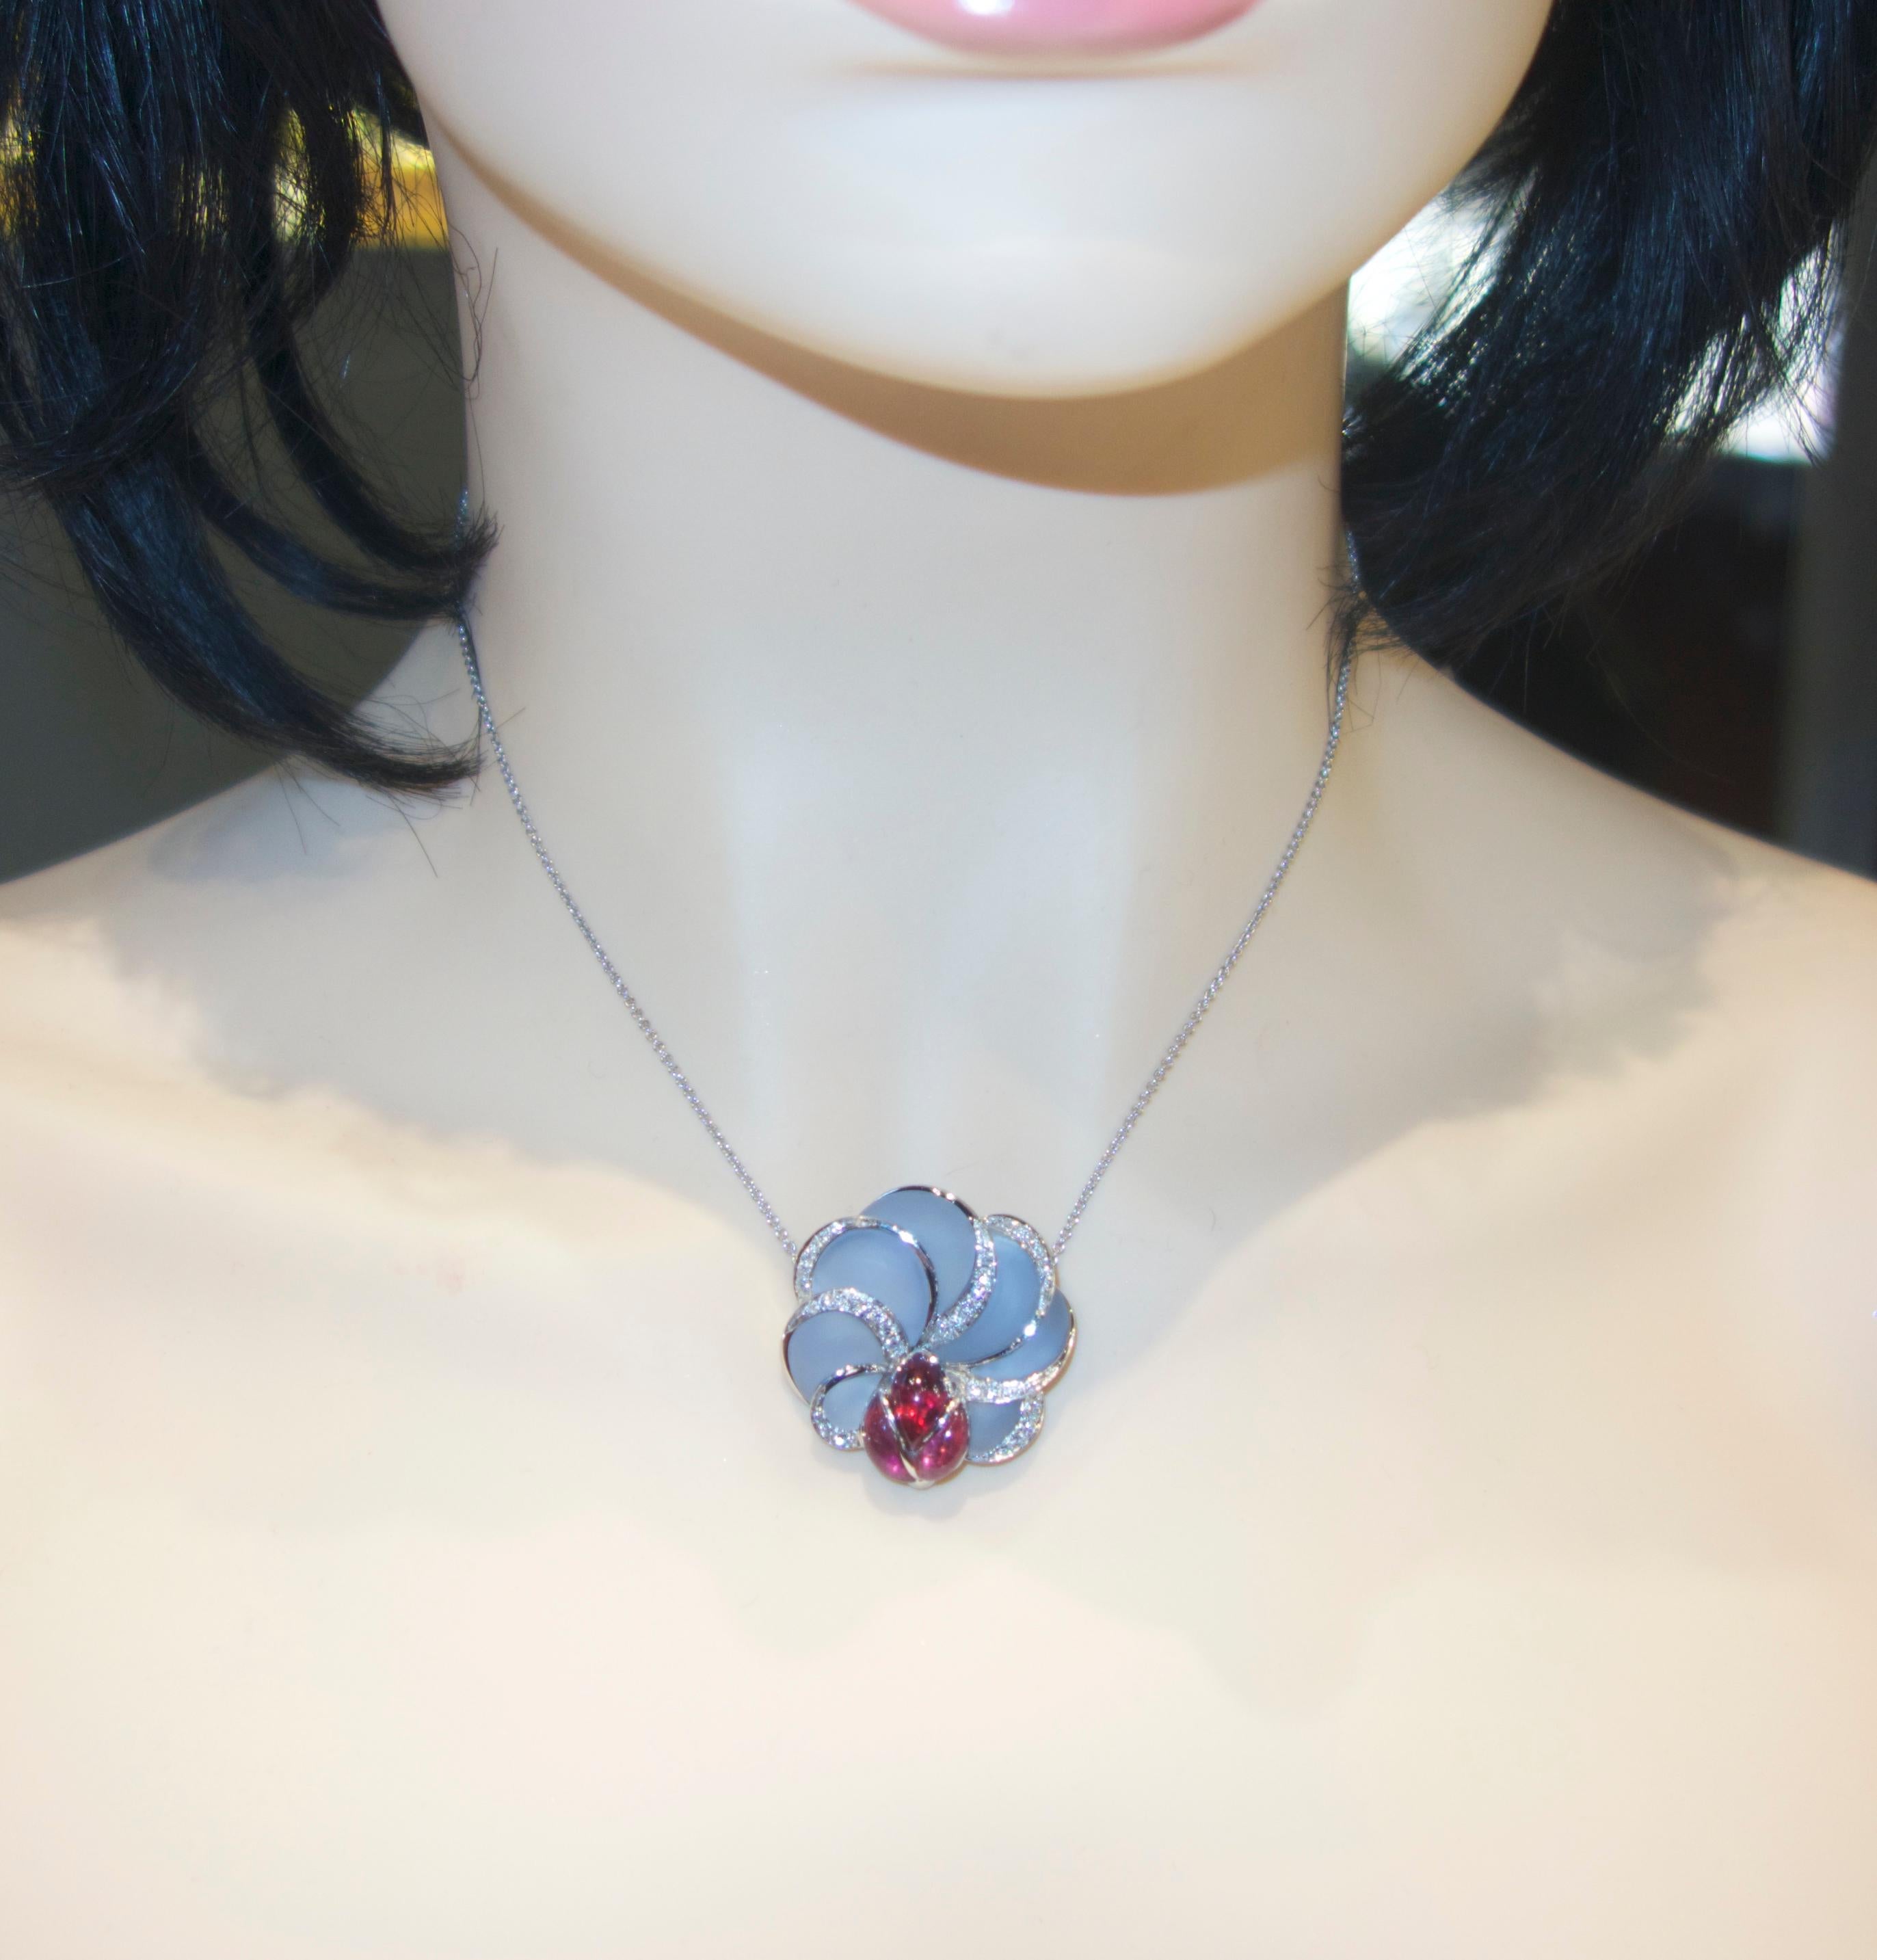 18K white gold pendant necklace prong set with natural bright red rubellite in a lady-bug motif perched on a llower made of frosted fancy cut natural light blue Chalcedony (a form of agate). and  accented with 33 diamonds - all finely cut, well